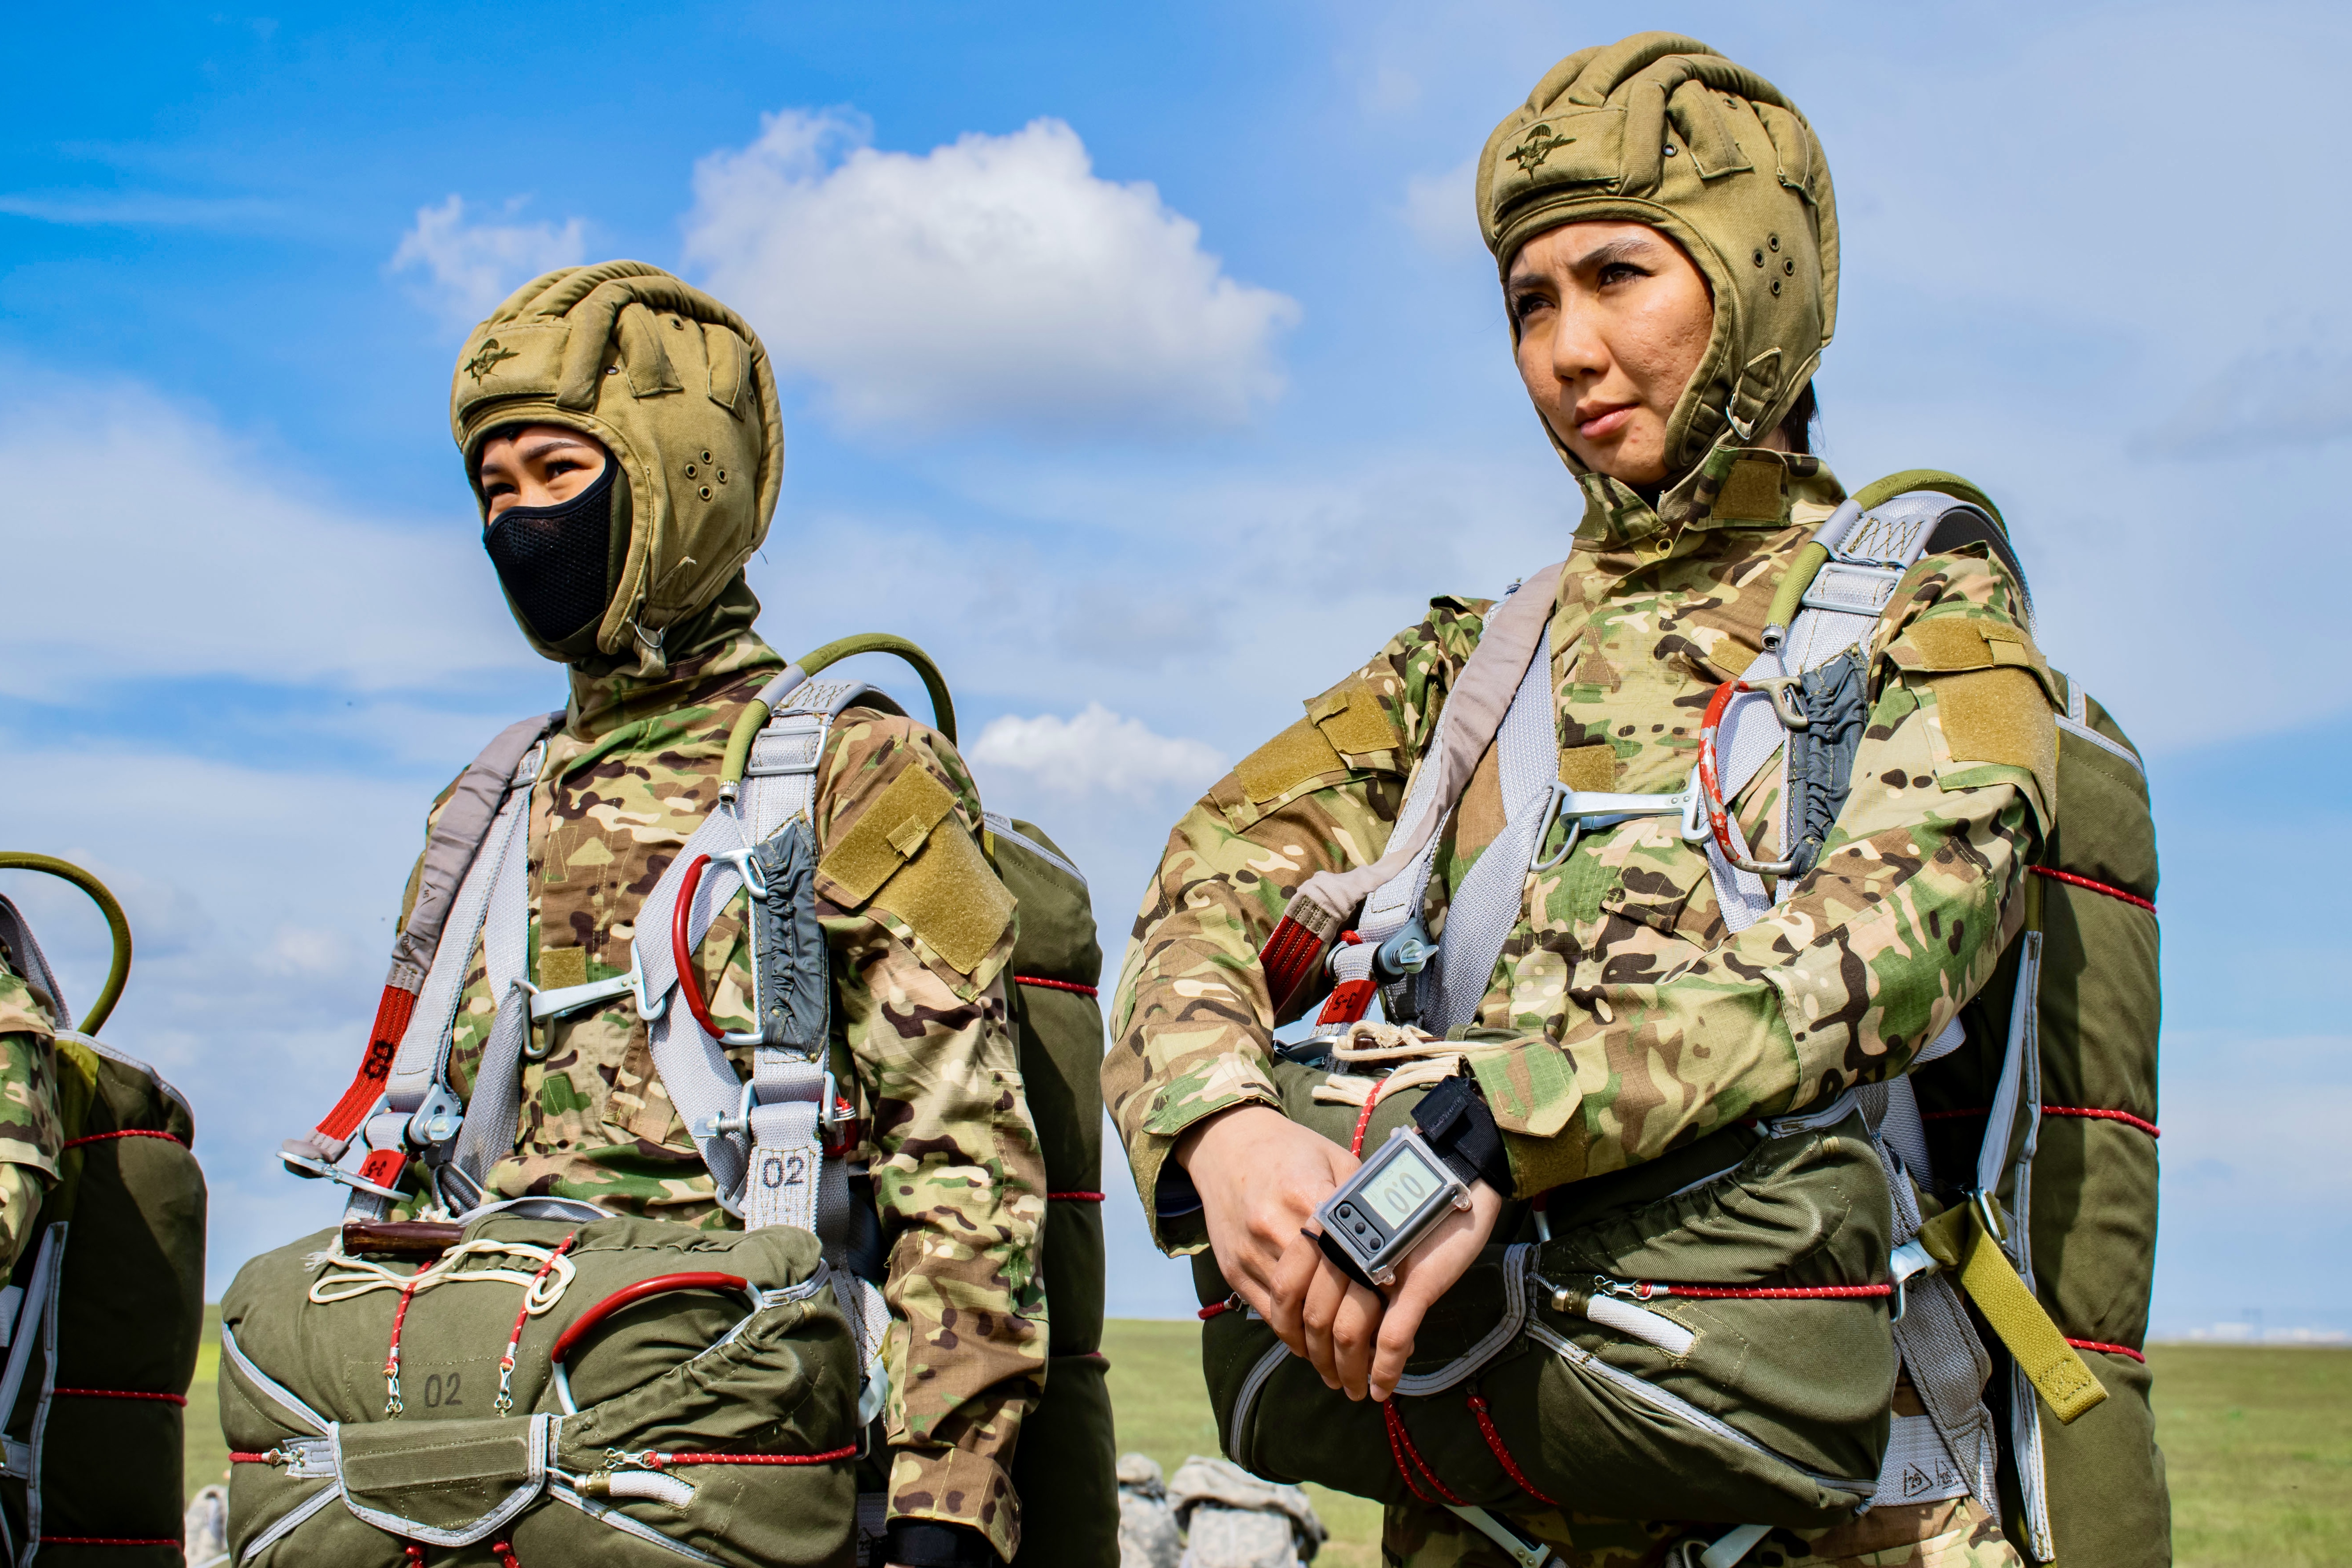 Kazakh paratroopers are preparing for international parachuting competitions